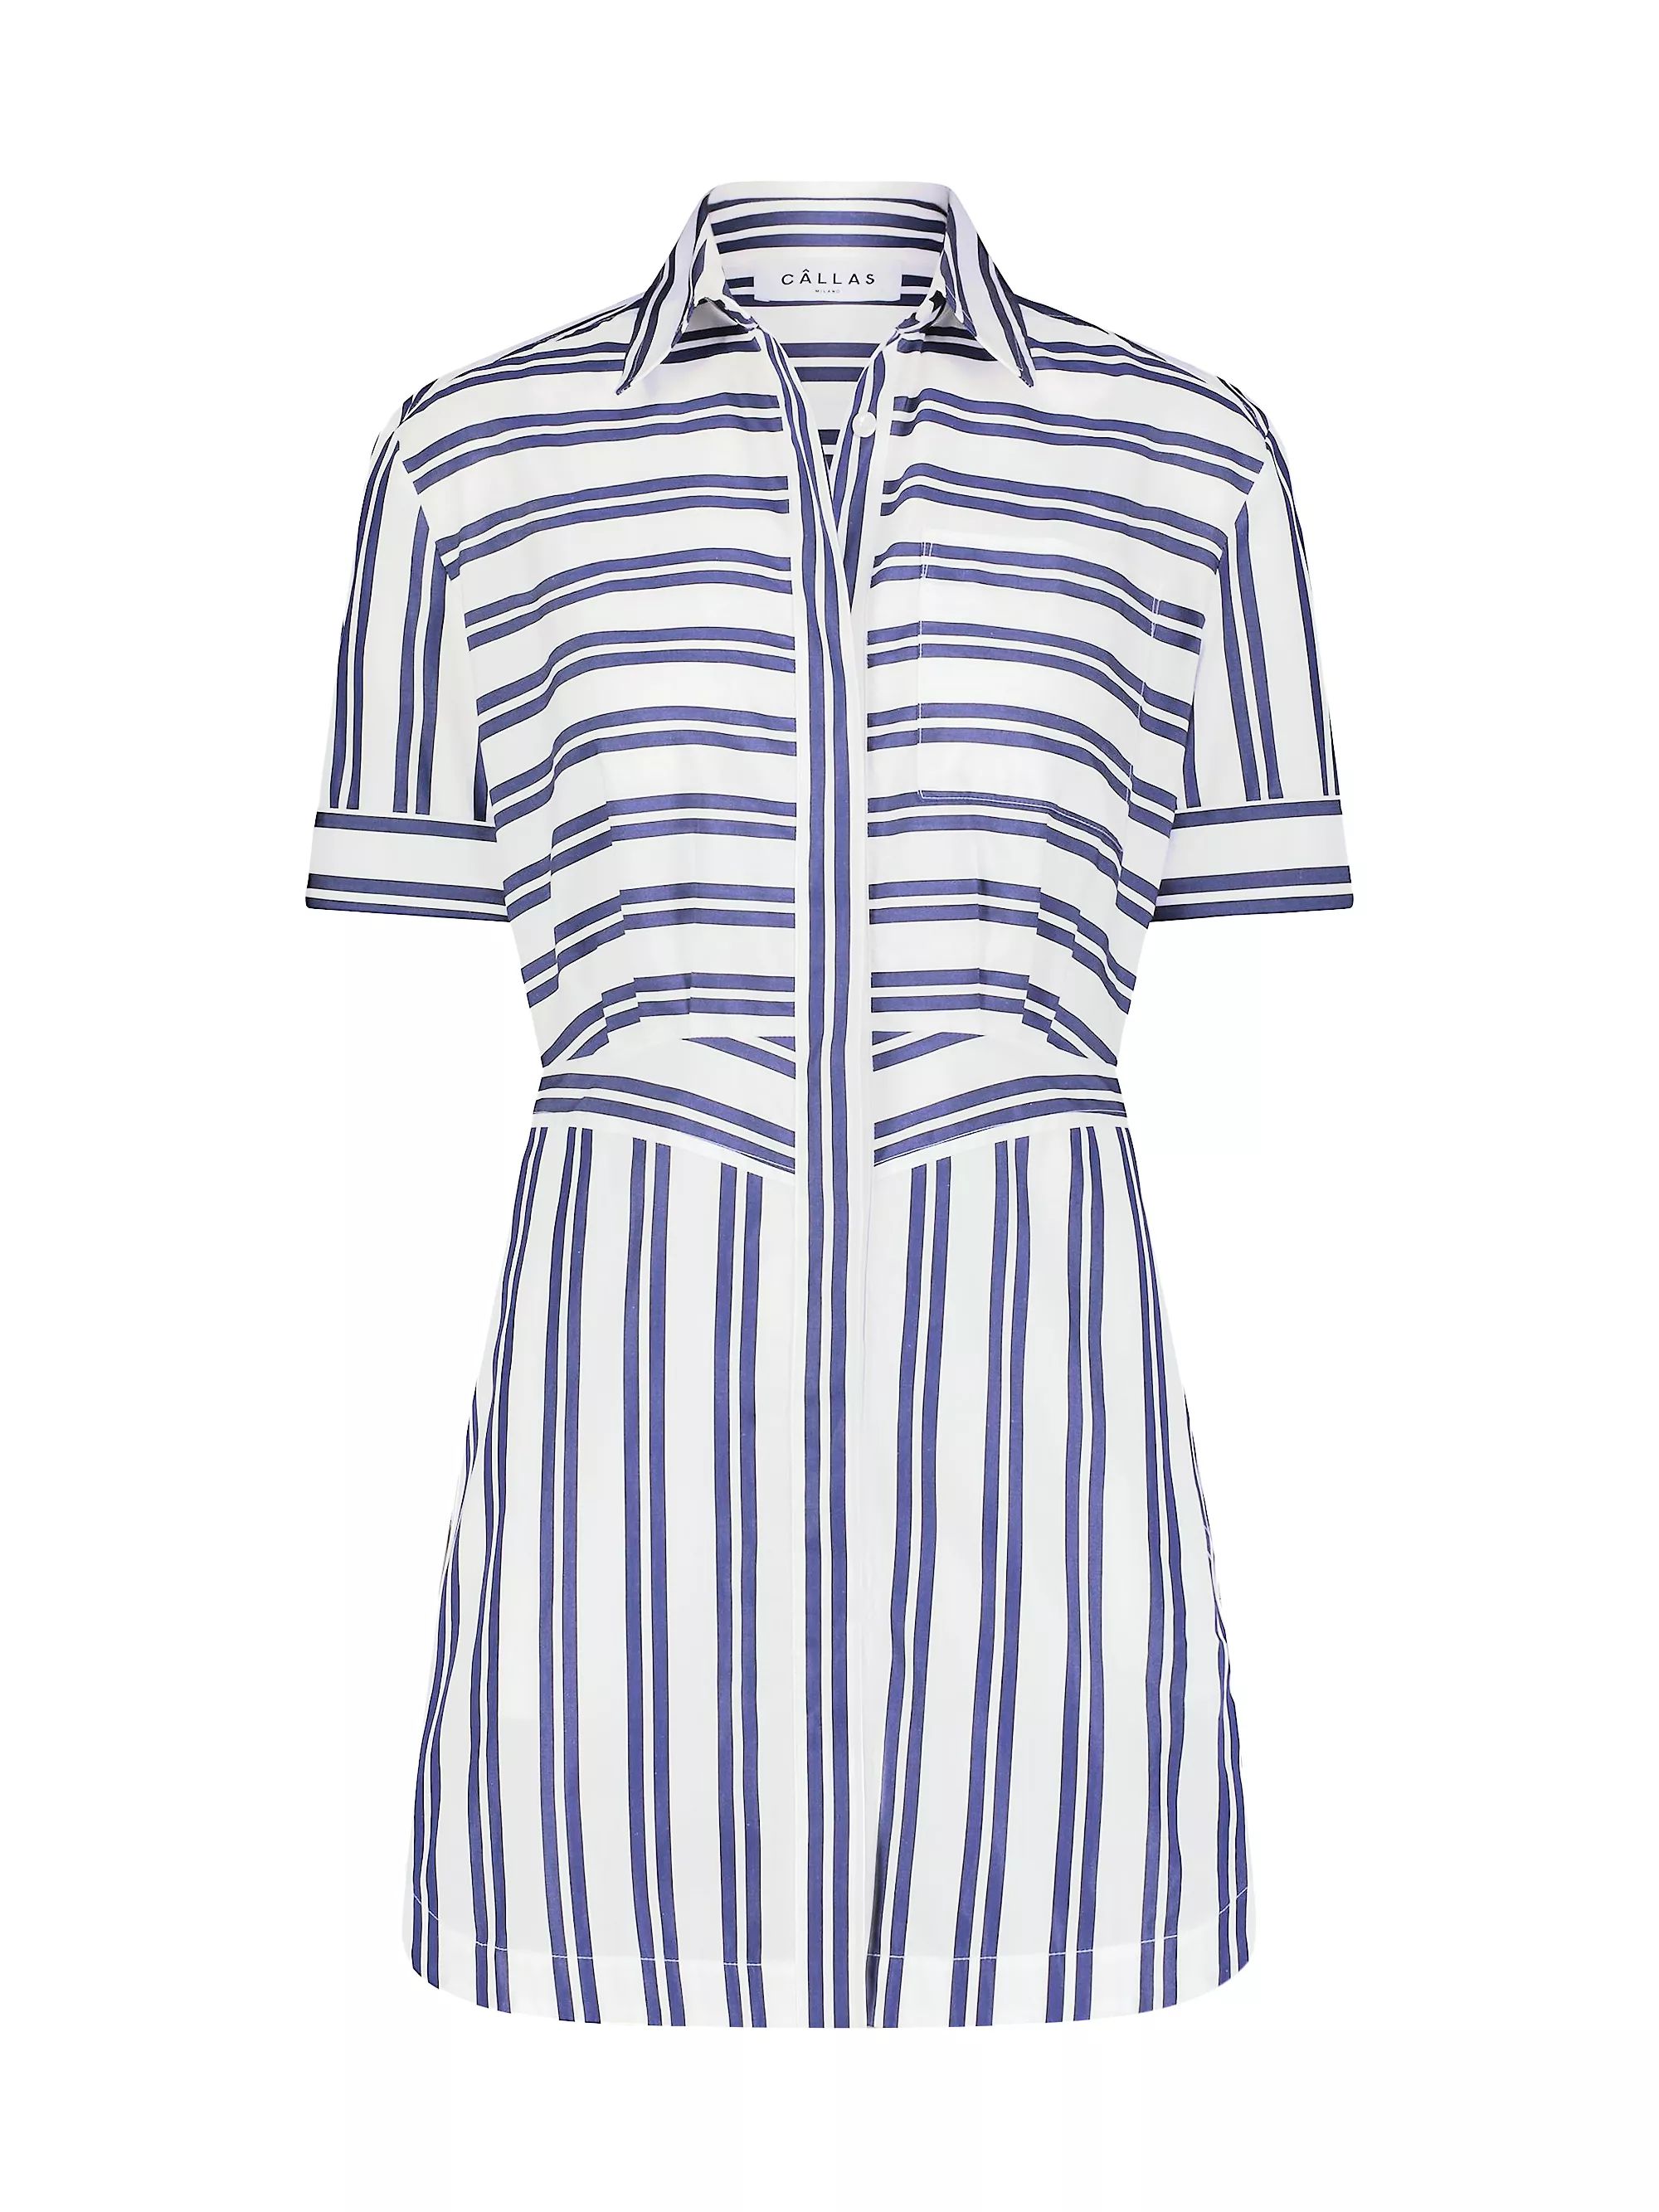 Candide Shirt Dress in stripes | Saks Fifth Avenue